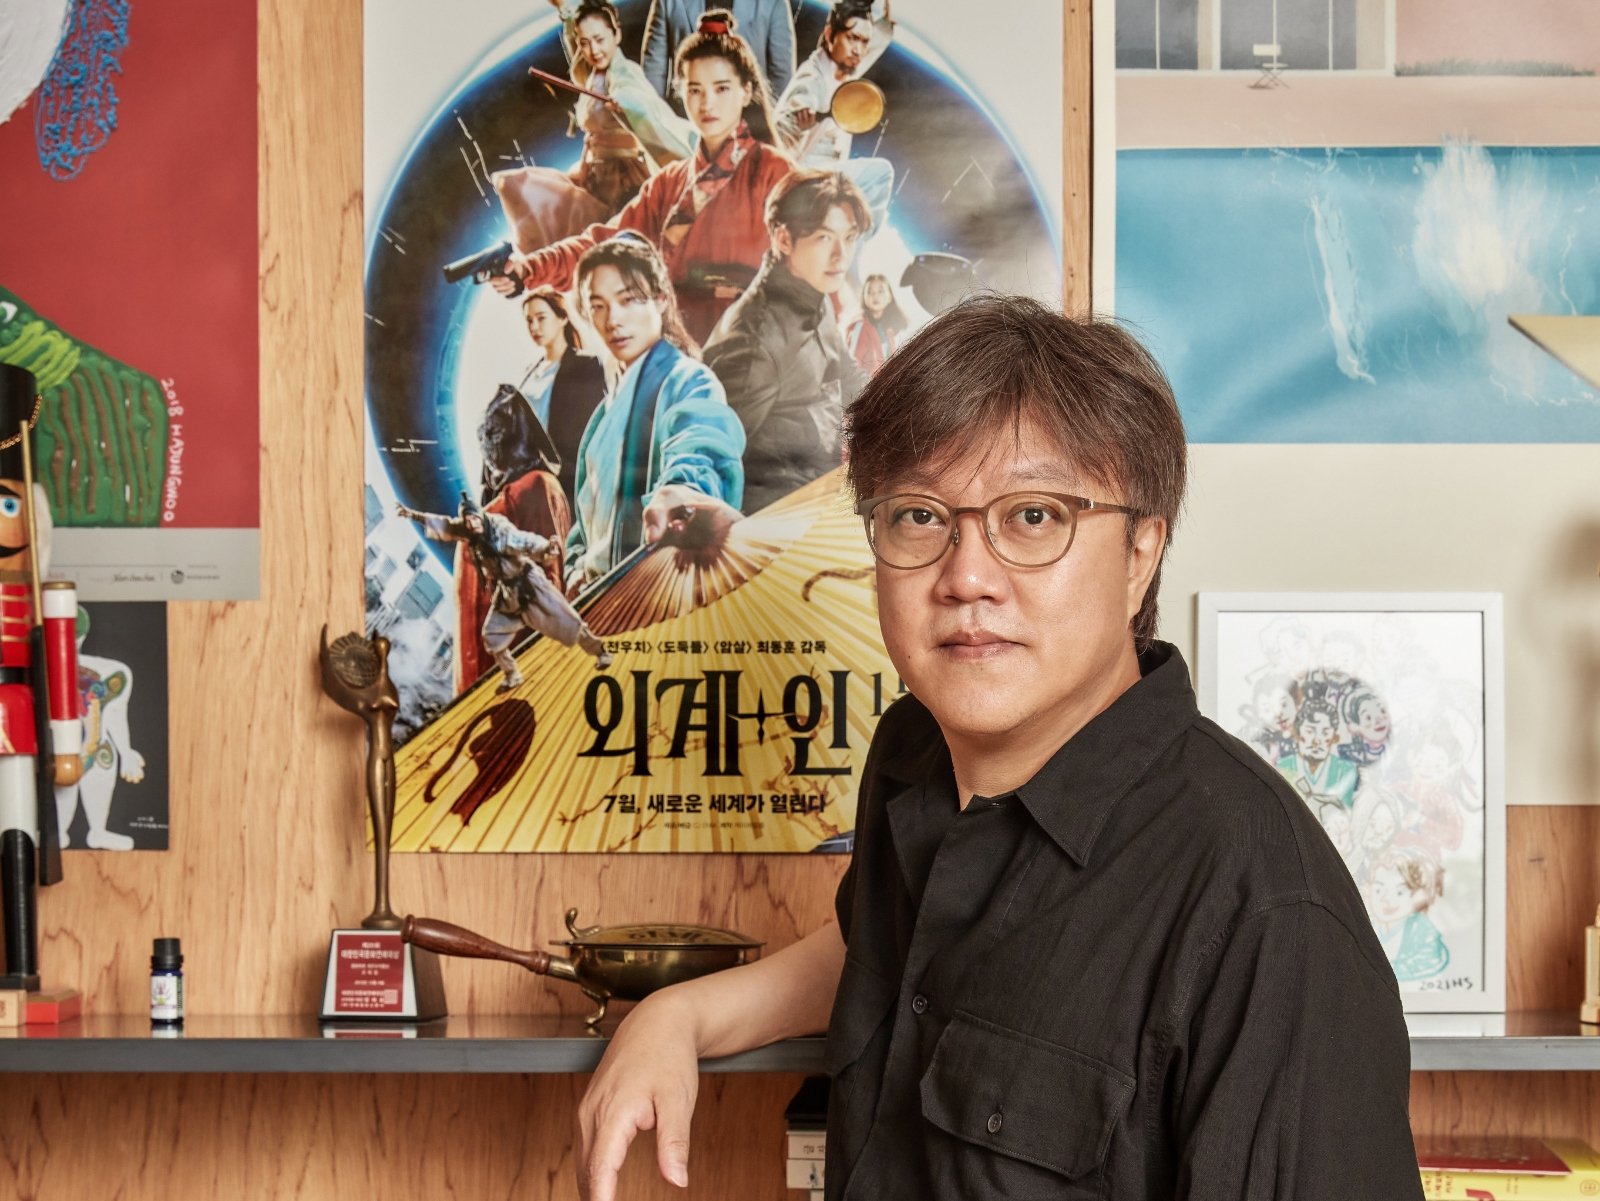 South Korean director, Choi Dong-hoon stands in front of the 'Alienoid' poster.